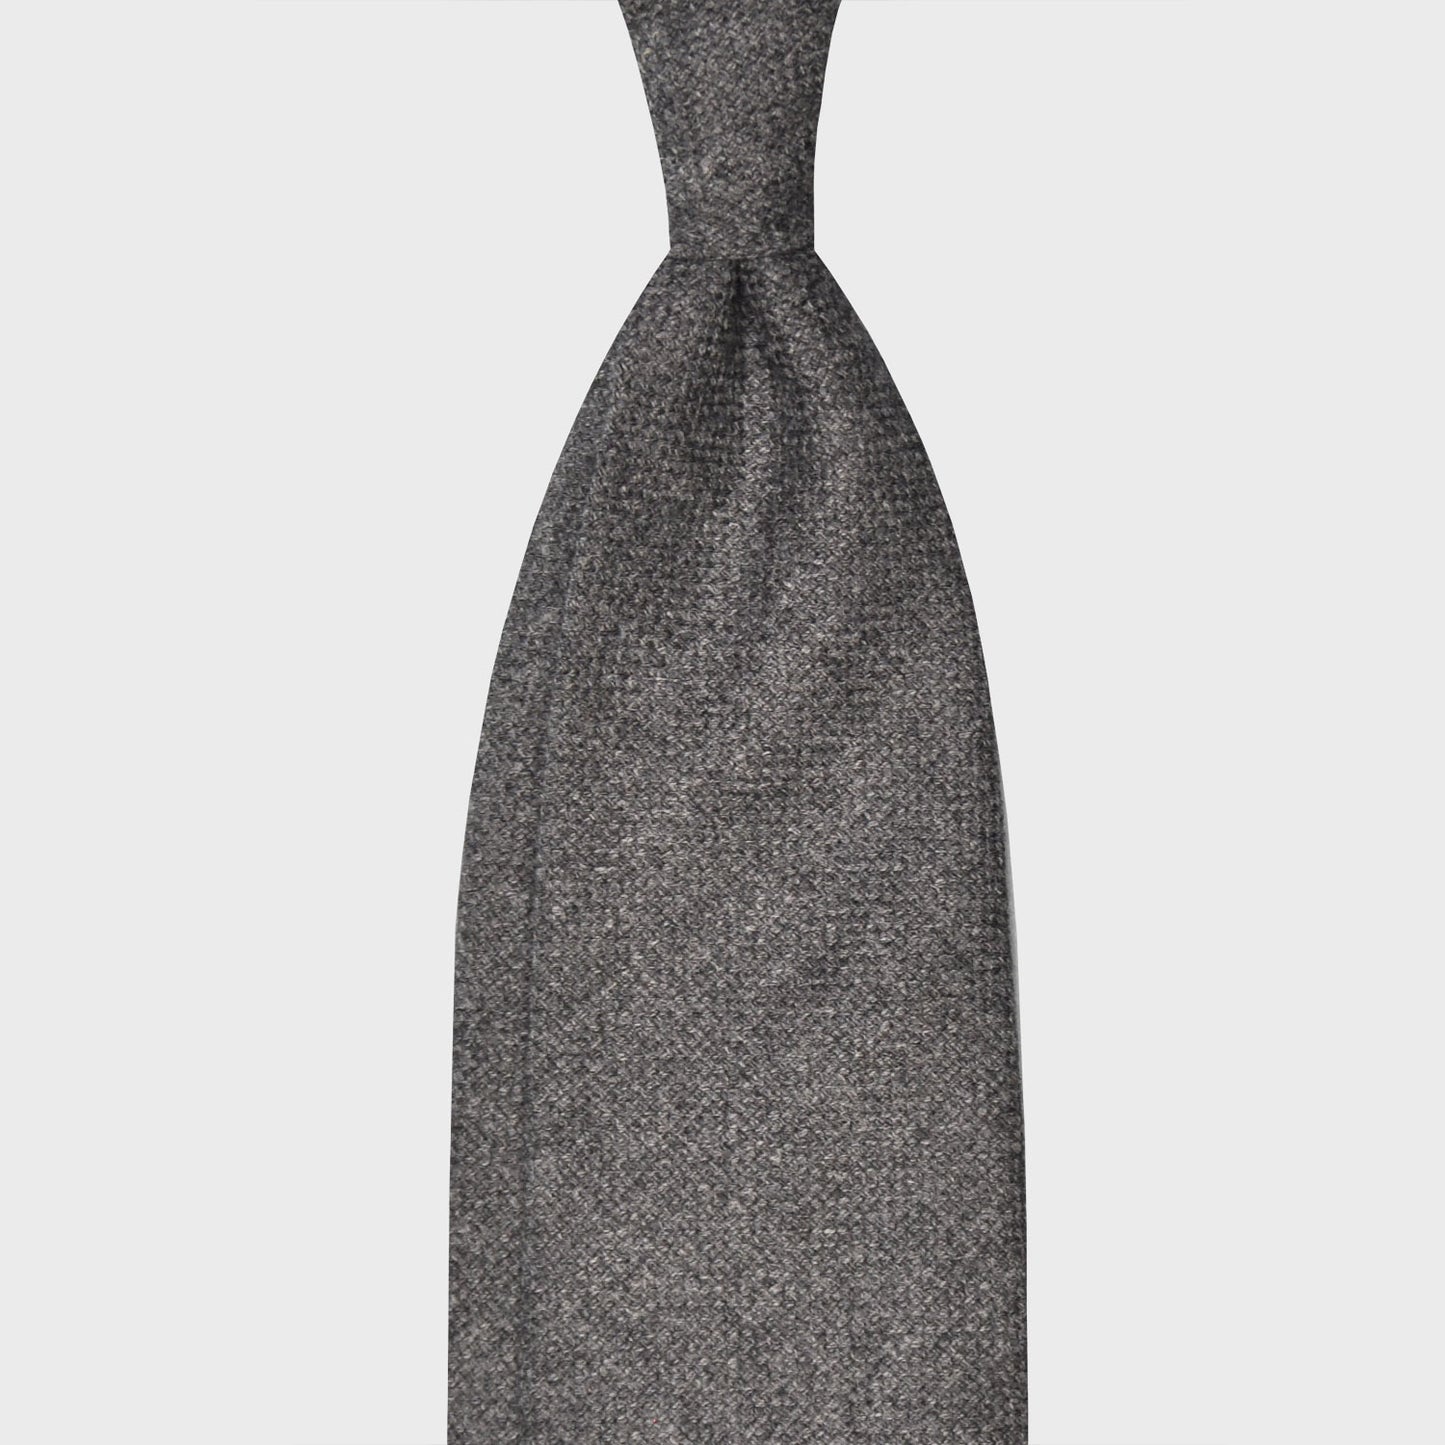 Smoke Grey Flannel Twill Wool Tie Unlined 3 Folds. Soft and light flannel twill wool tie, handmade F.Marino Napoli for Wools Boutique Uomo, smoke grey color, soft fabric to the touch, not bristly, ideal for a regular knot.